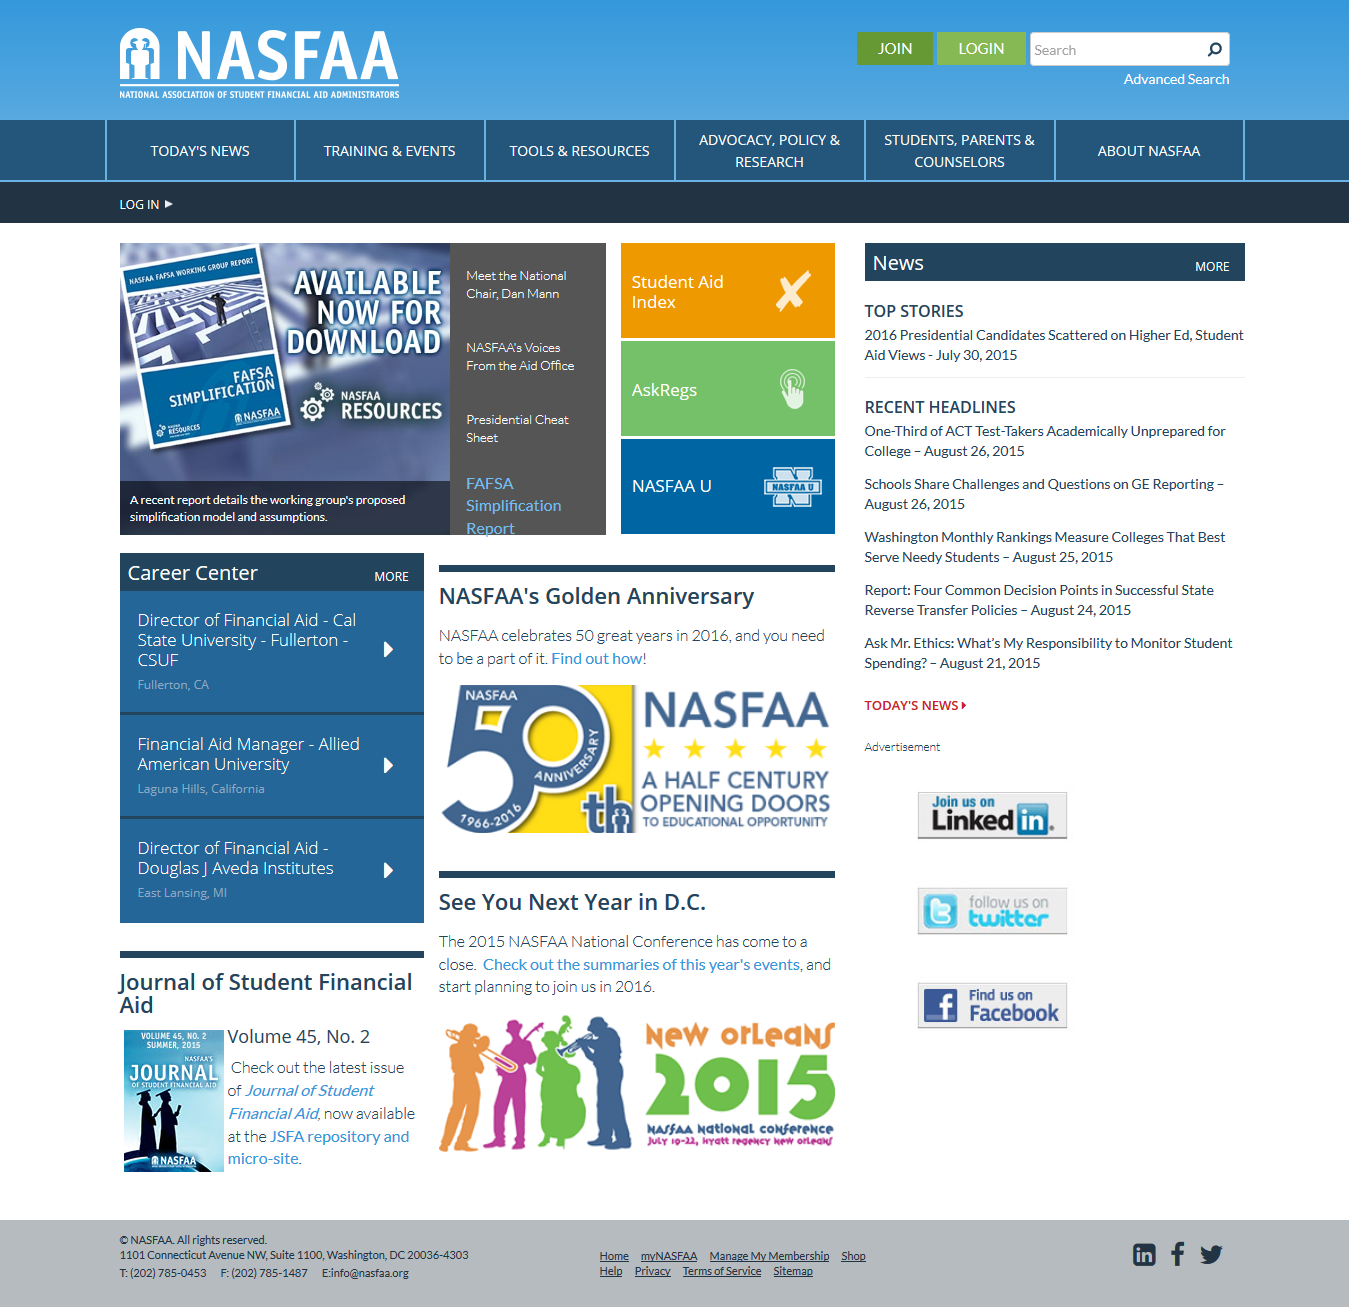 National Association of Student Financial Aid Administrators